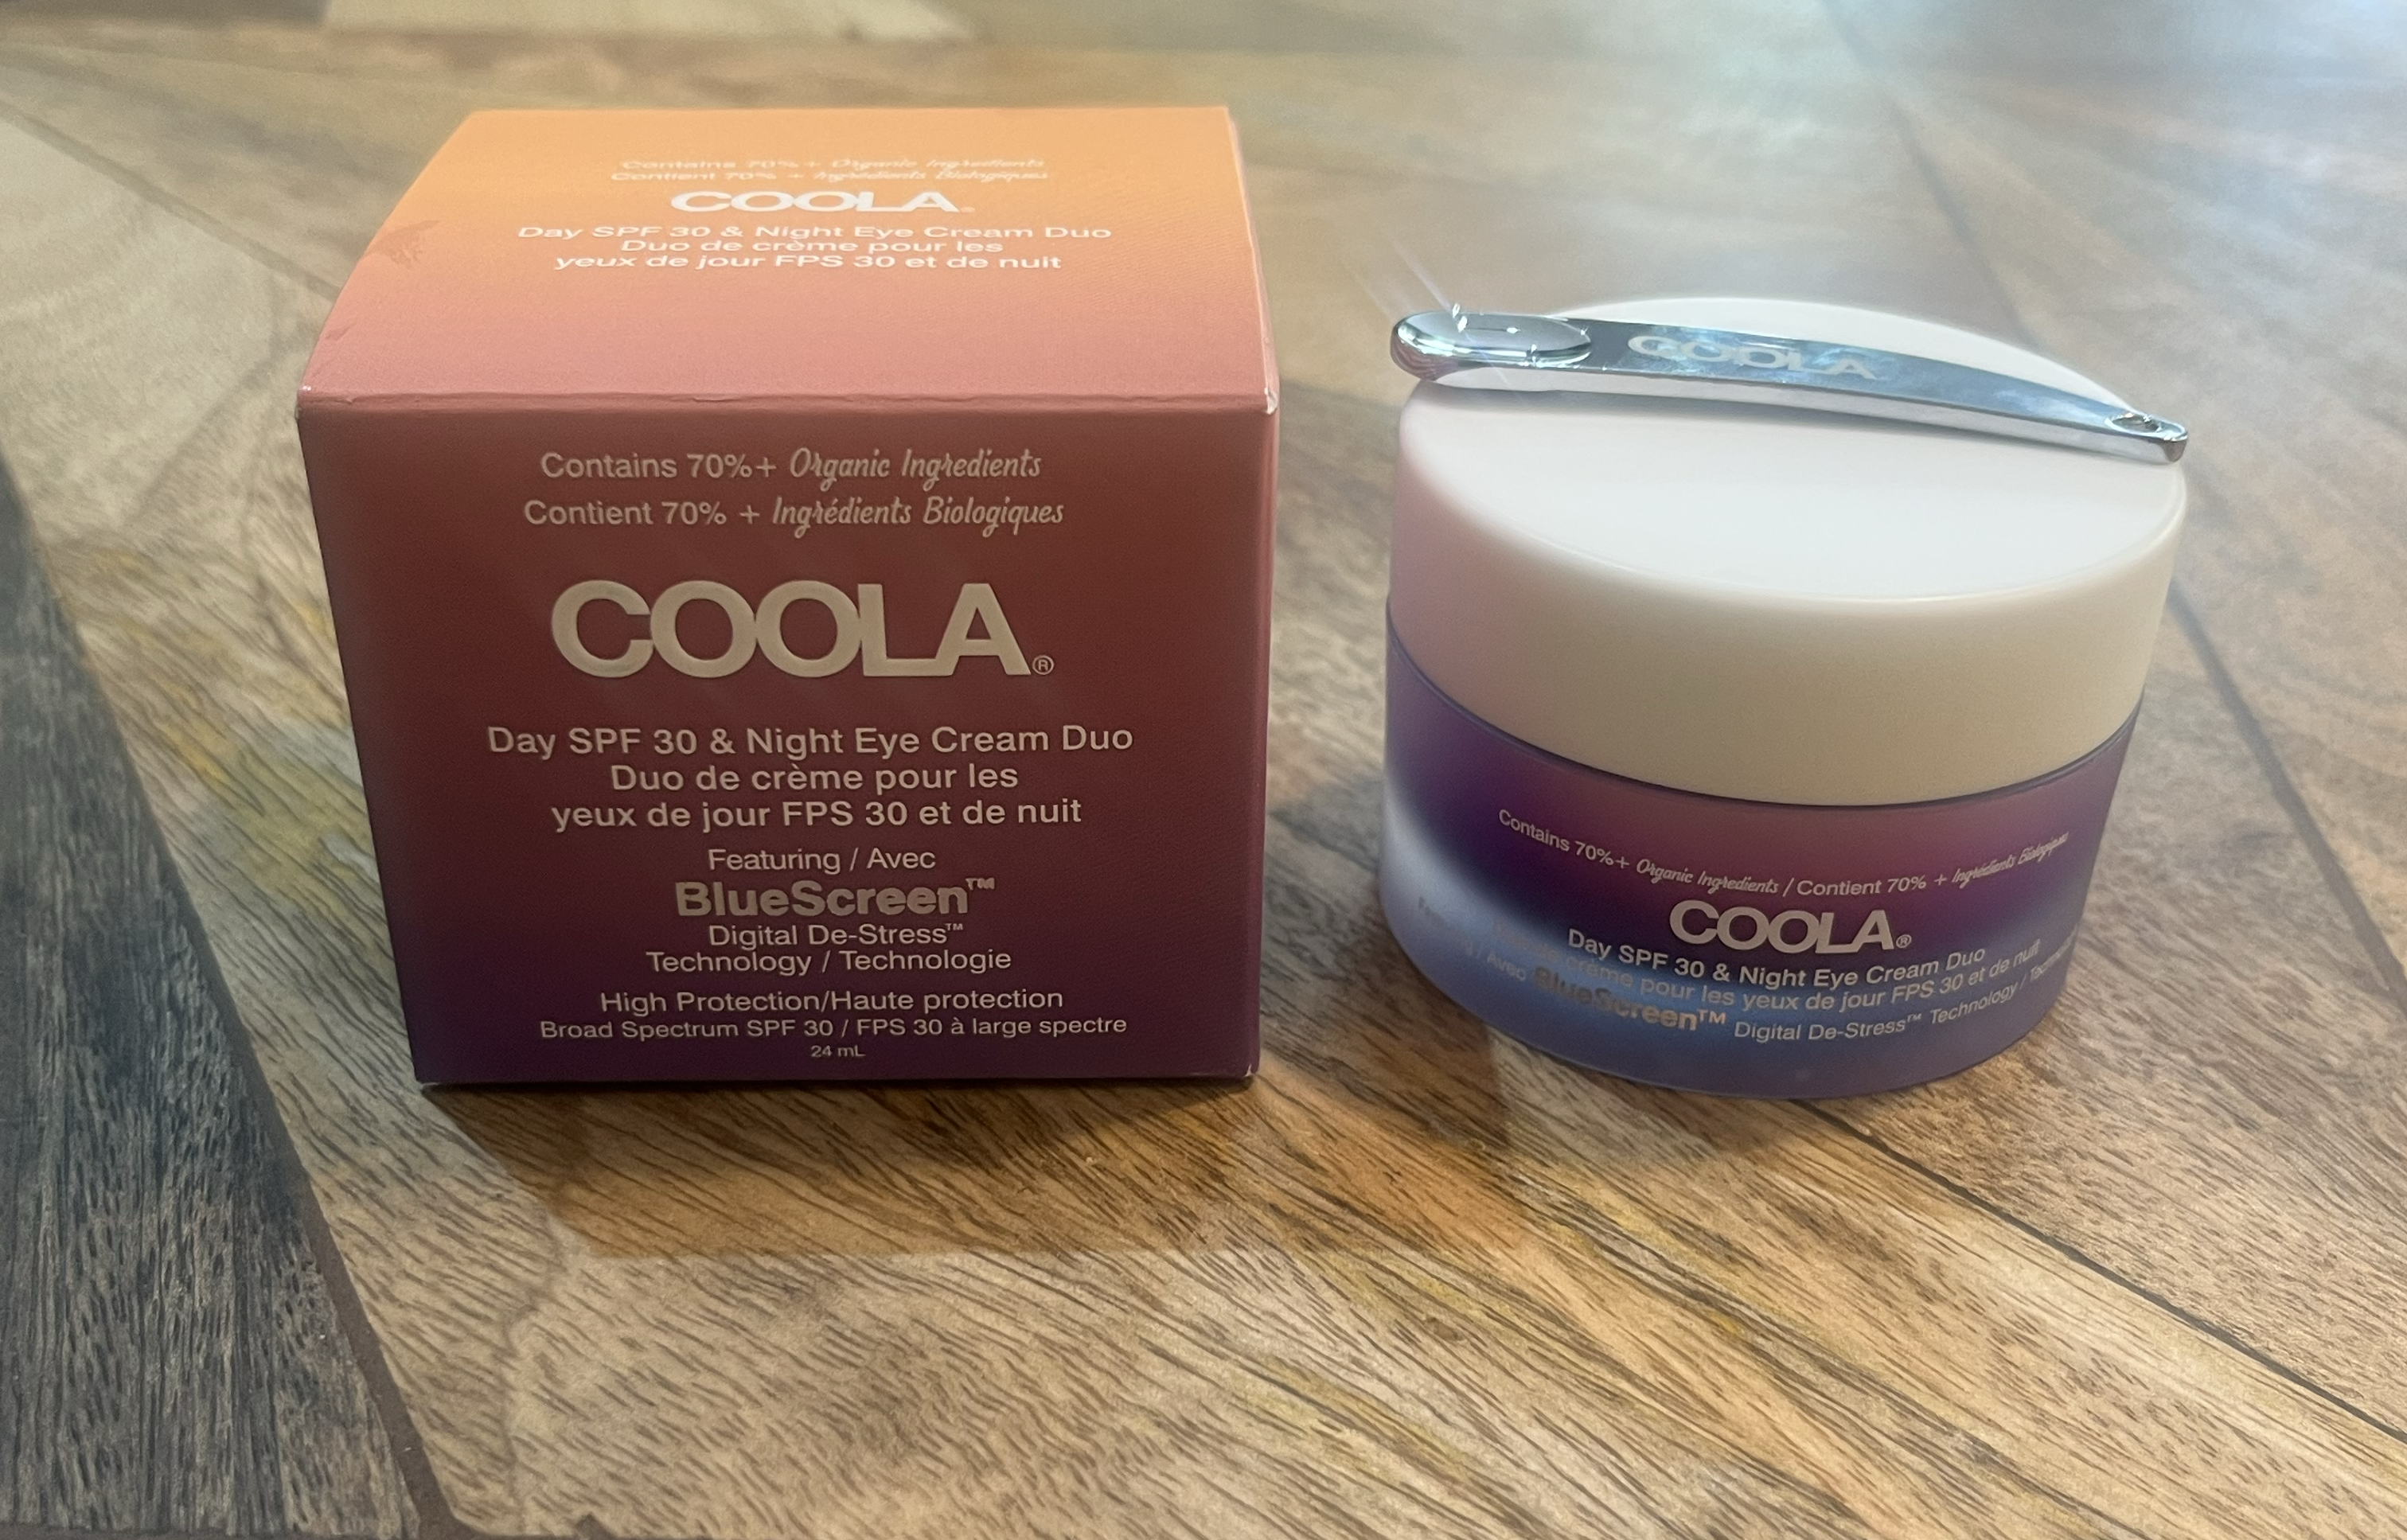 The Coola Night Eye Cream protects the sensitive under-eye area.